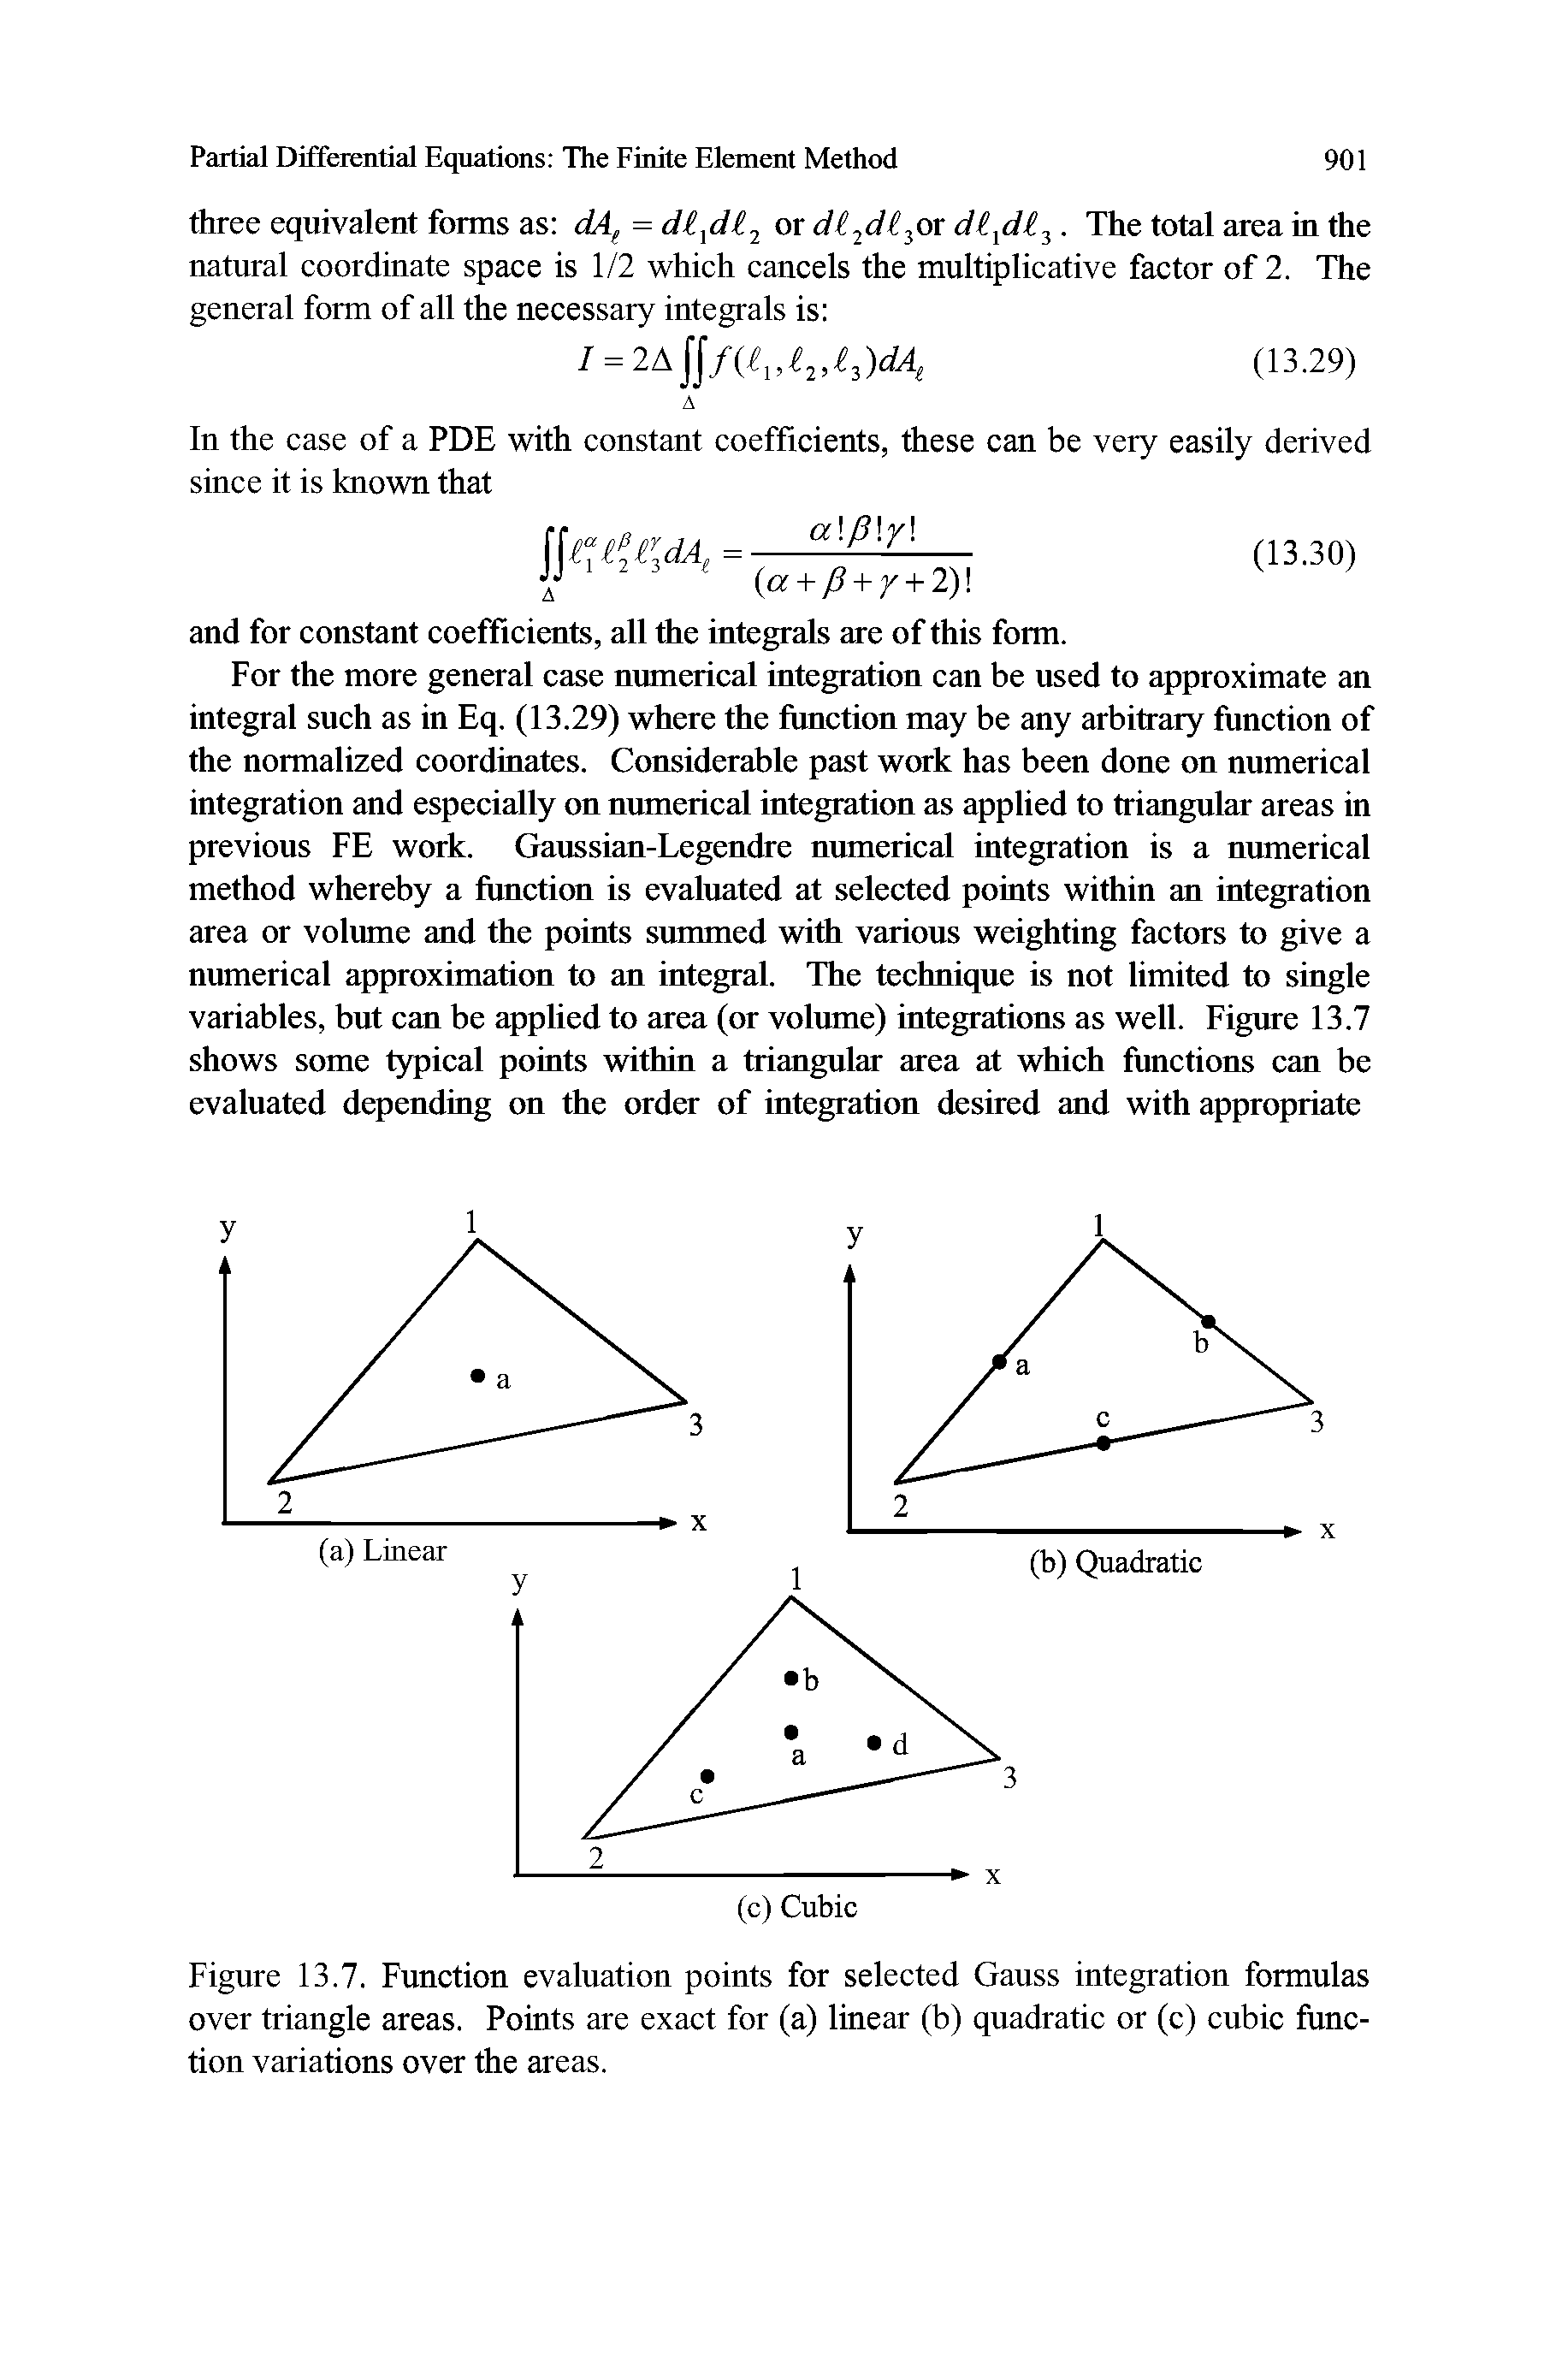 Figure 13.7. Function evaluation points for selected Gauss integration formulas over triangle areas. Points are exact for (a) linear (b) quadratic or (c) cubic function variations over the areas.